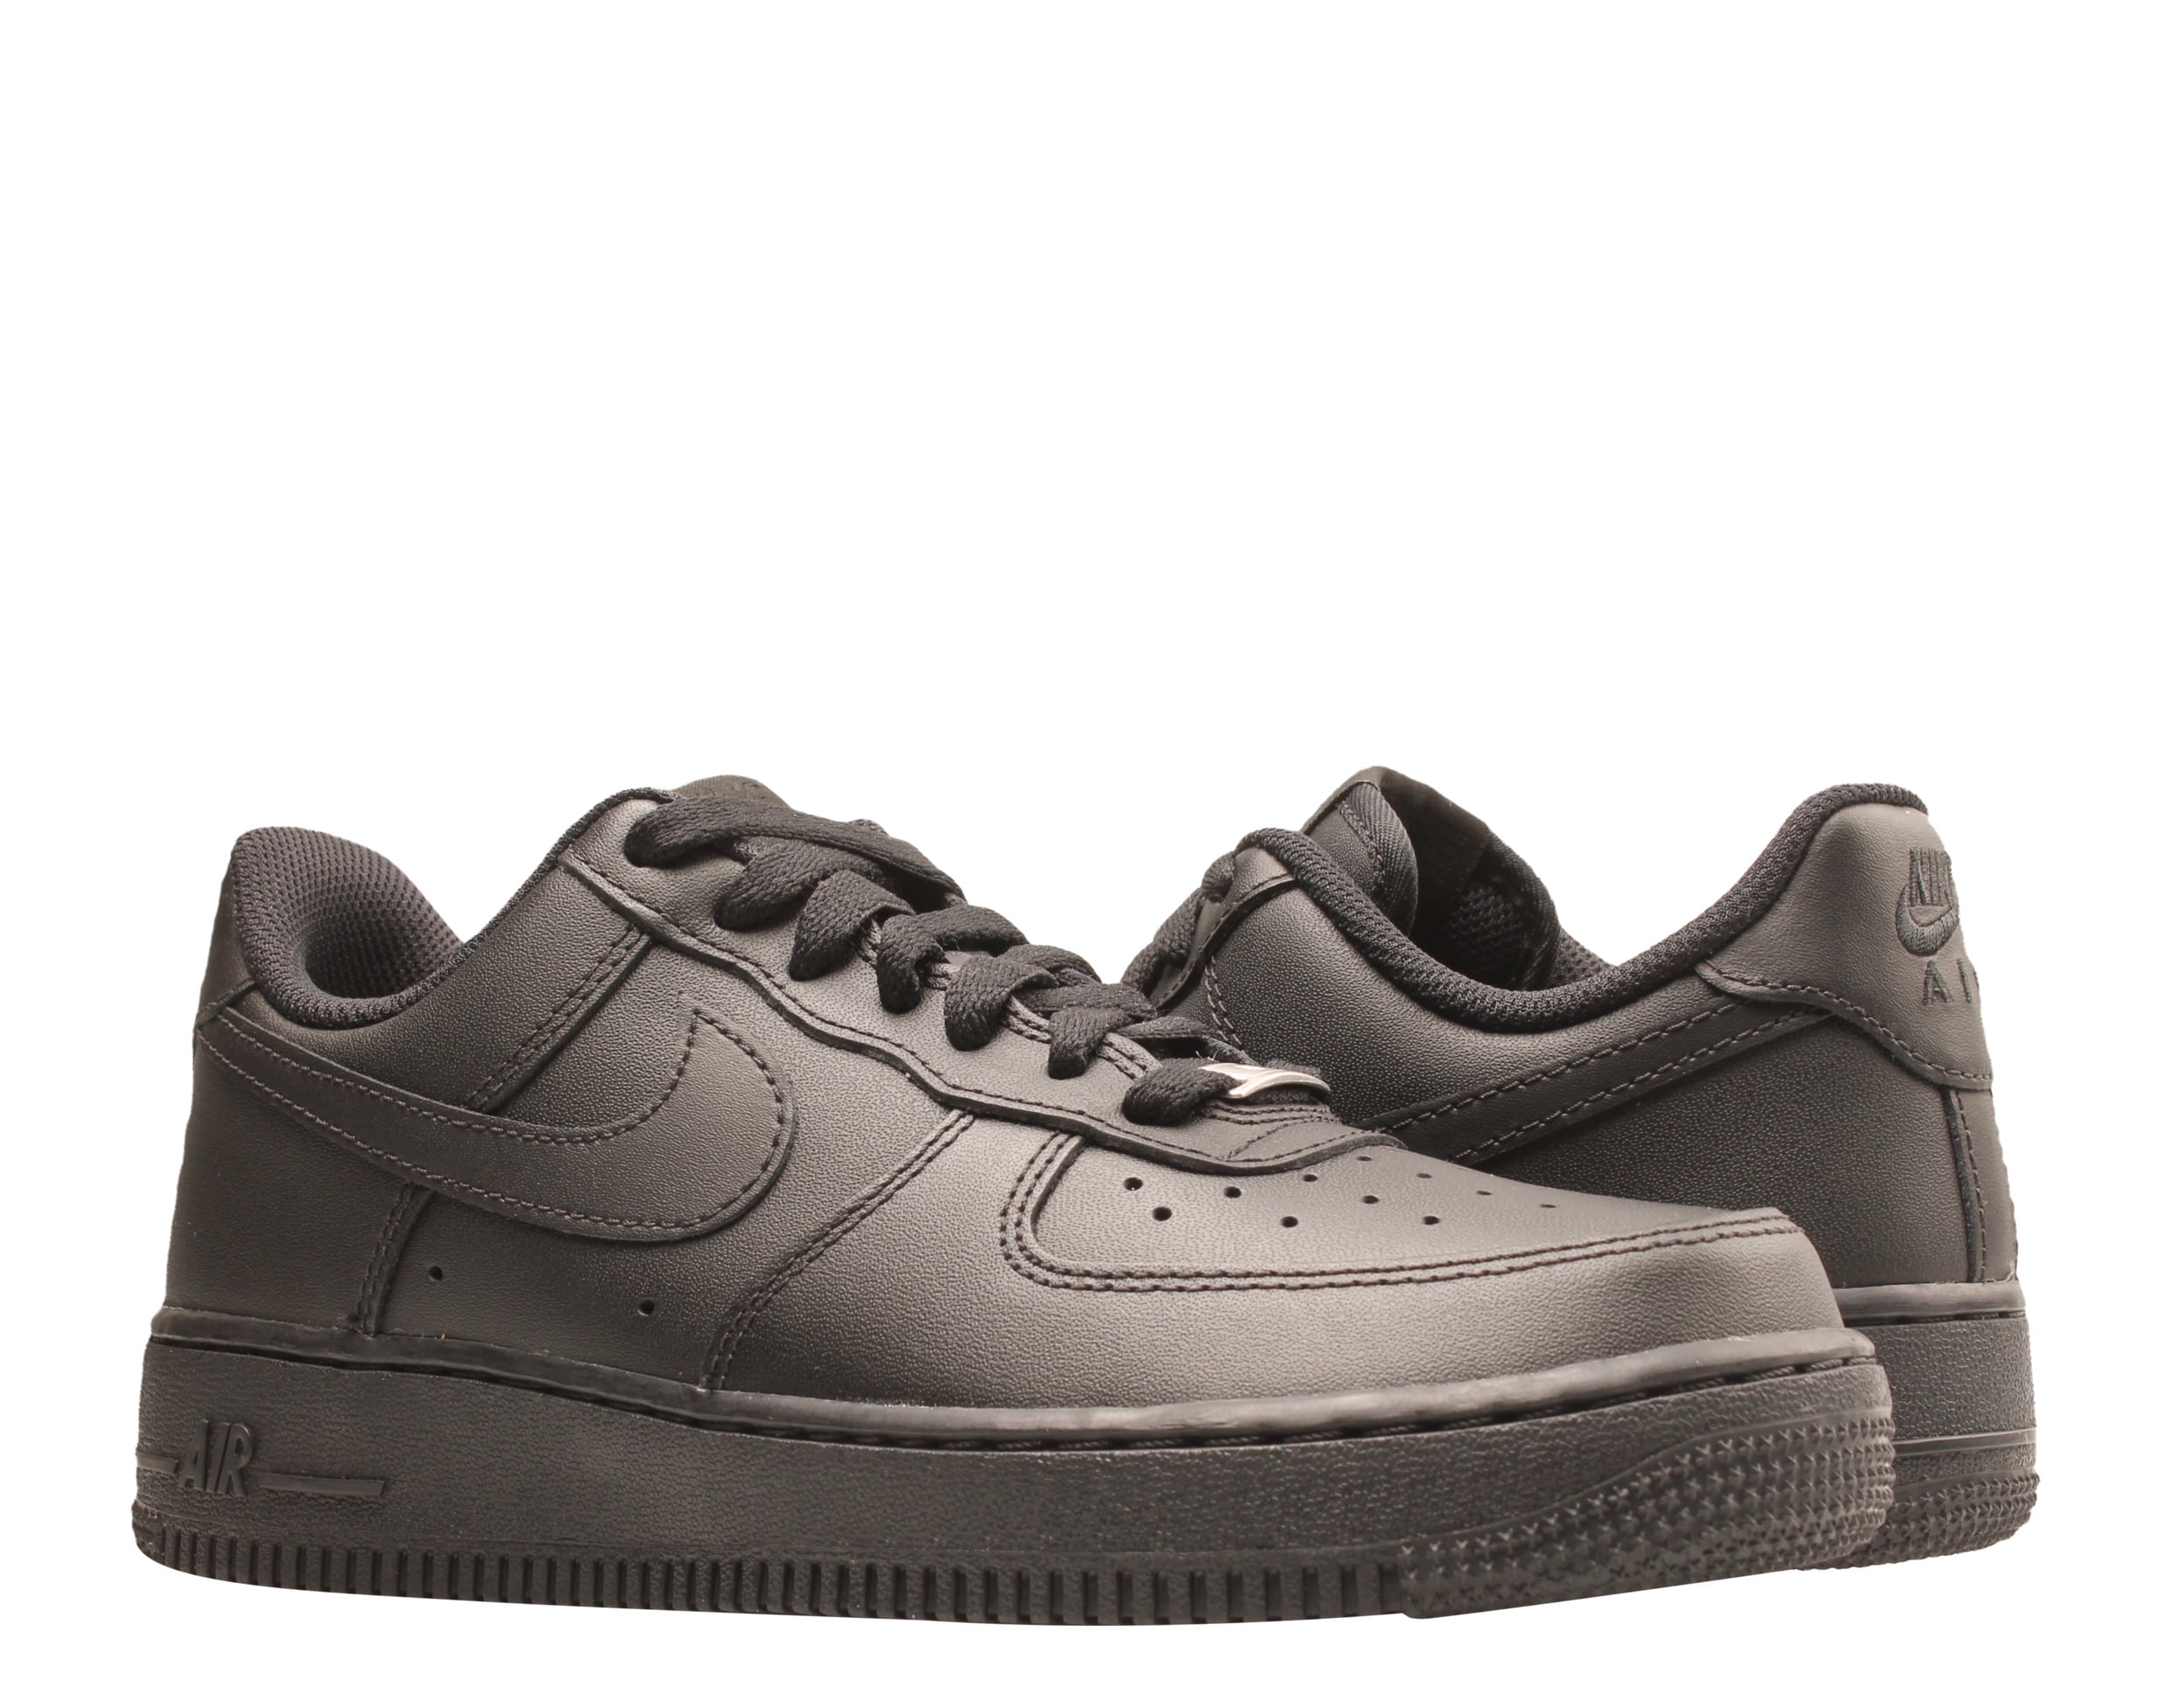 nike air force one size 7